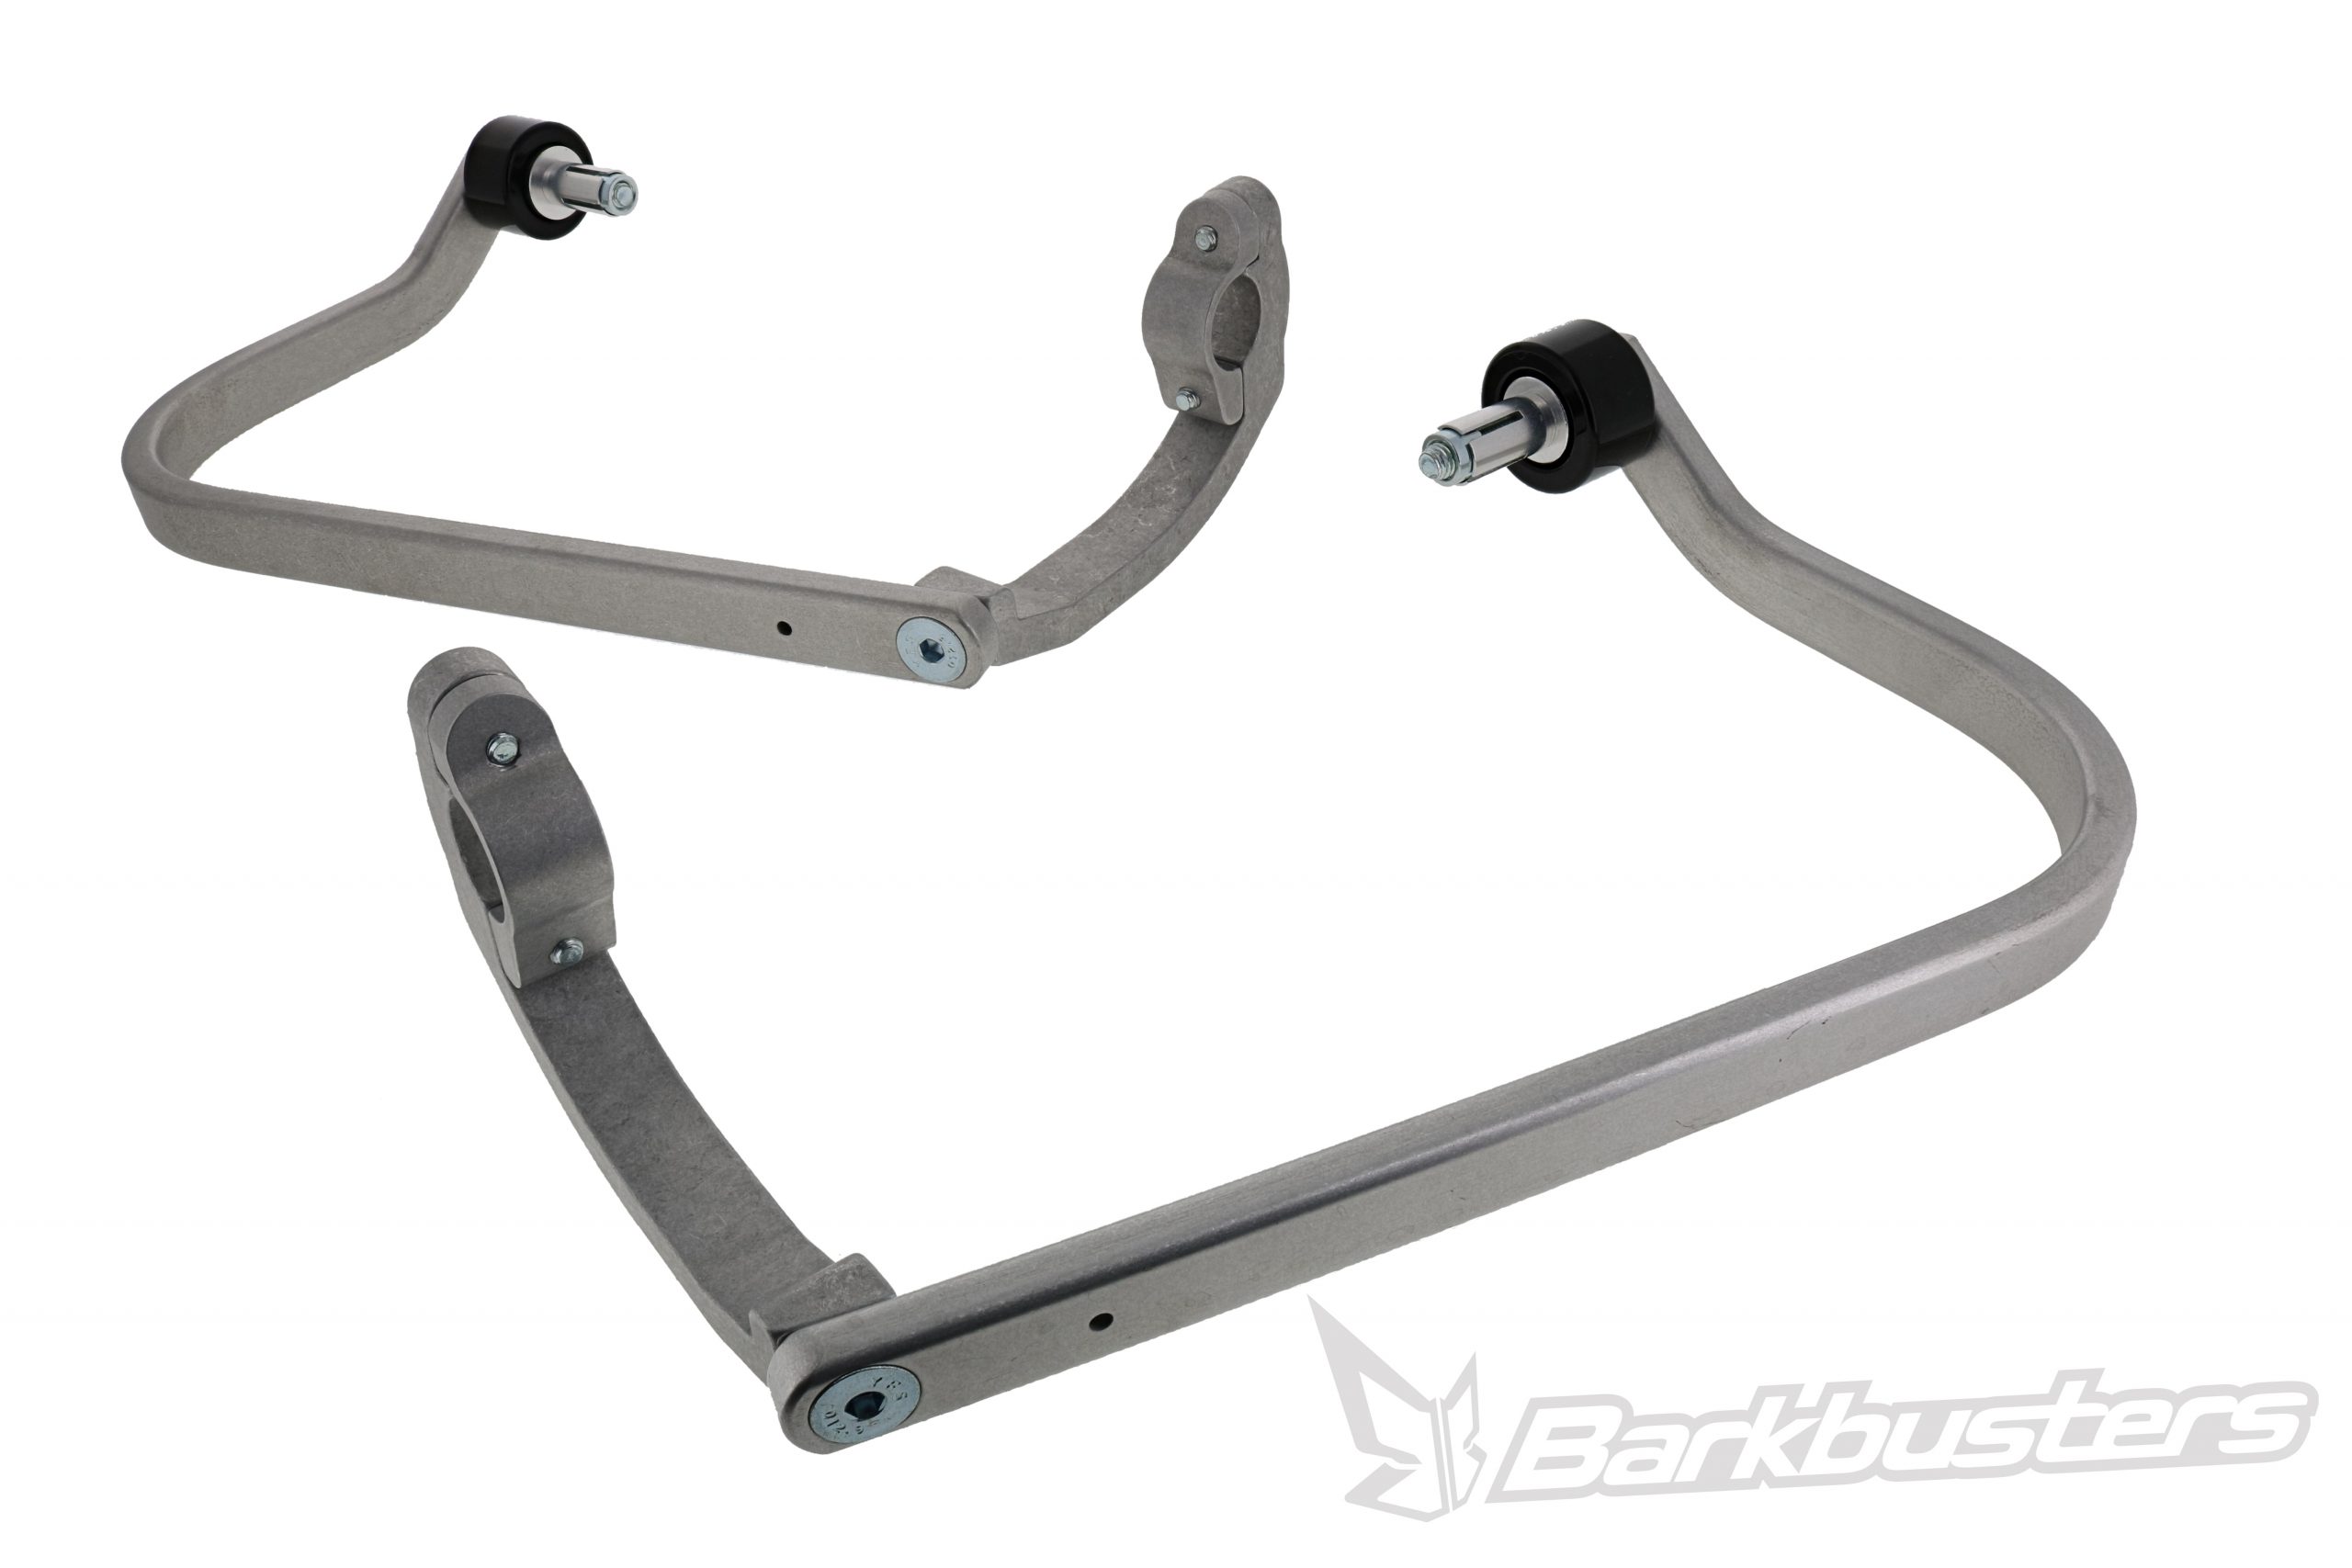 BarkBusters Backbone Two-point Mounting Kit for JET, STORM, and VPS ...